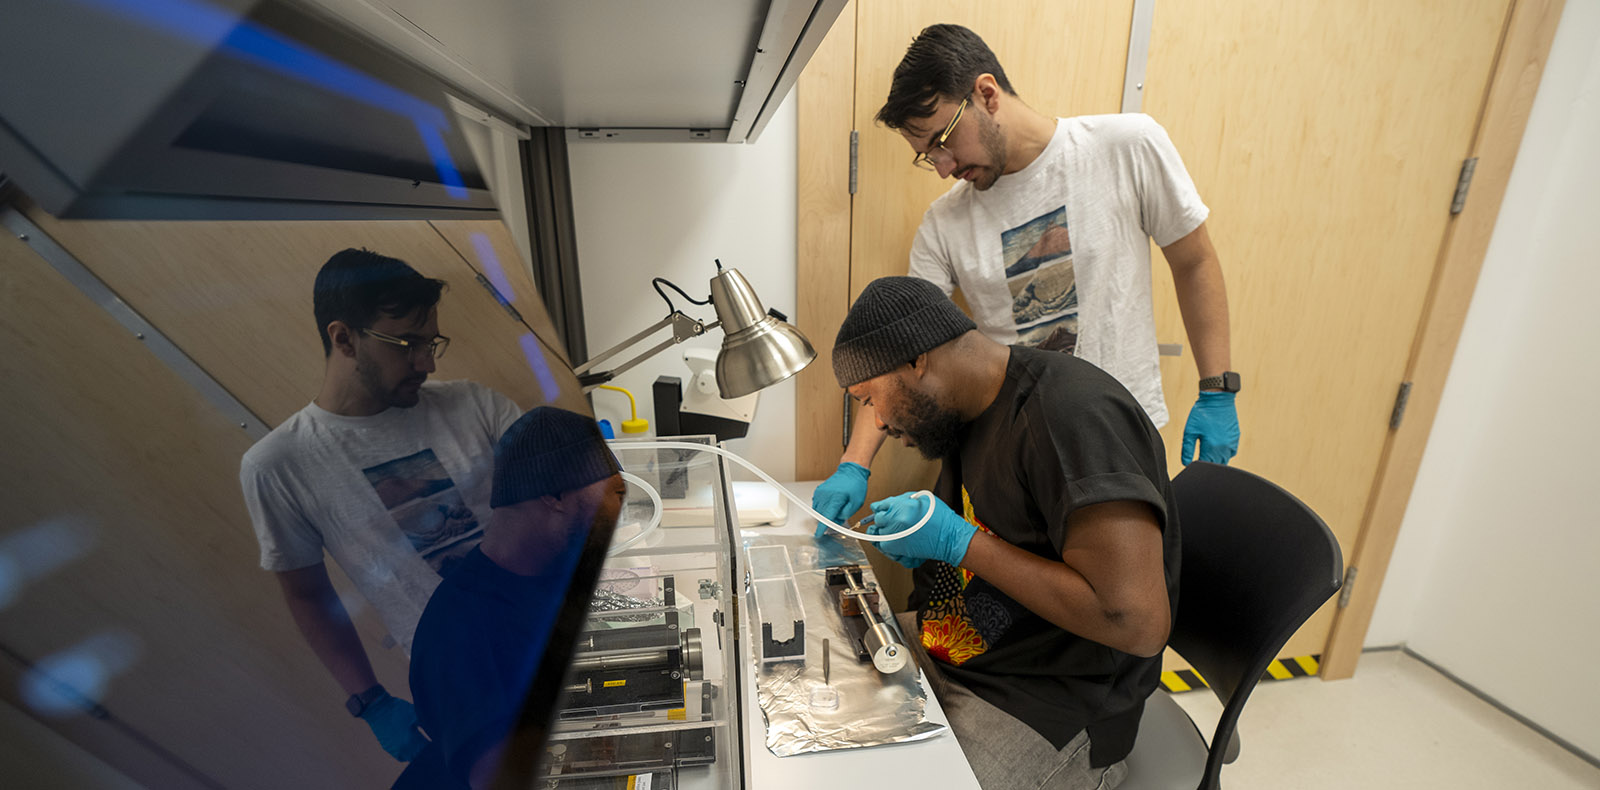 Grad students preparing materials in the Canadian Centre for Electron Microscopy